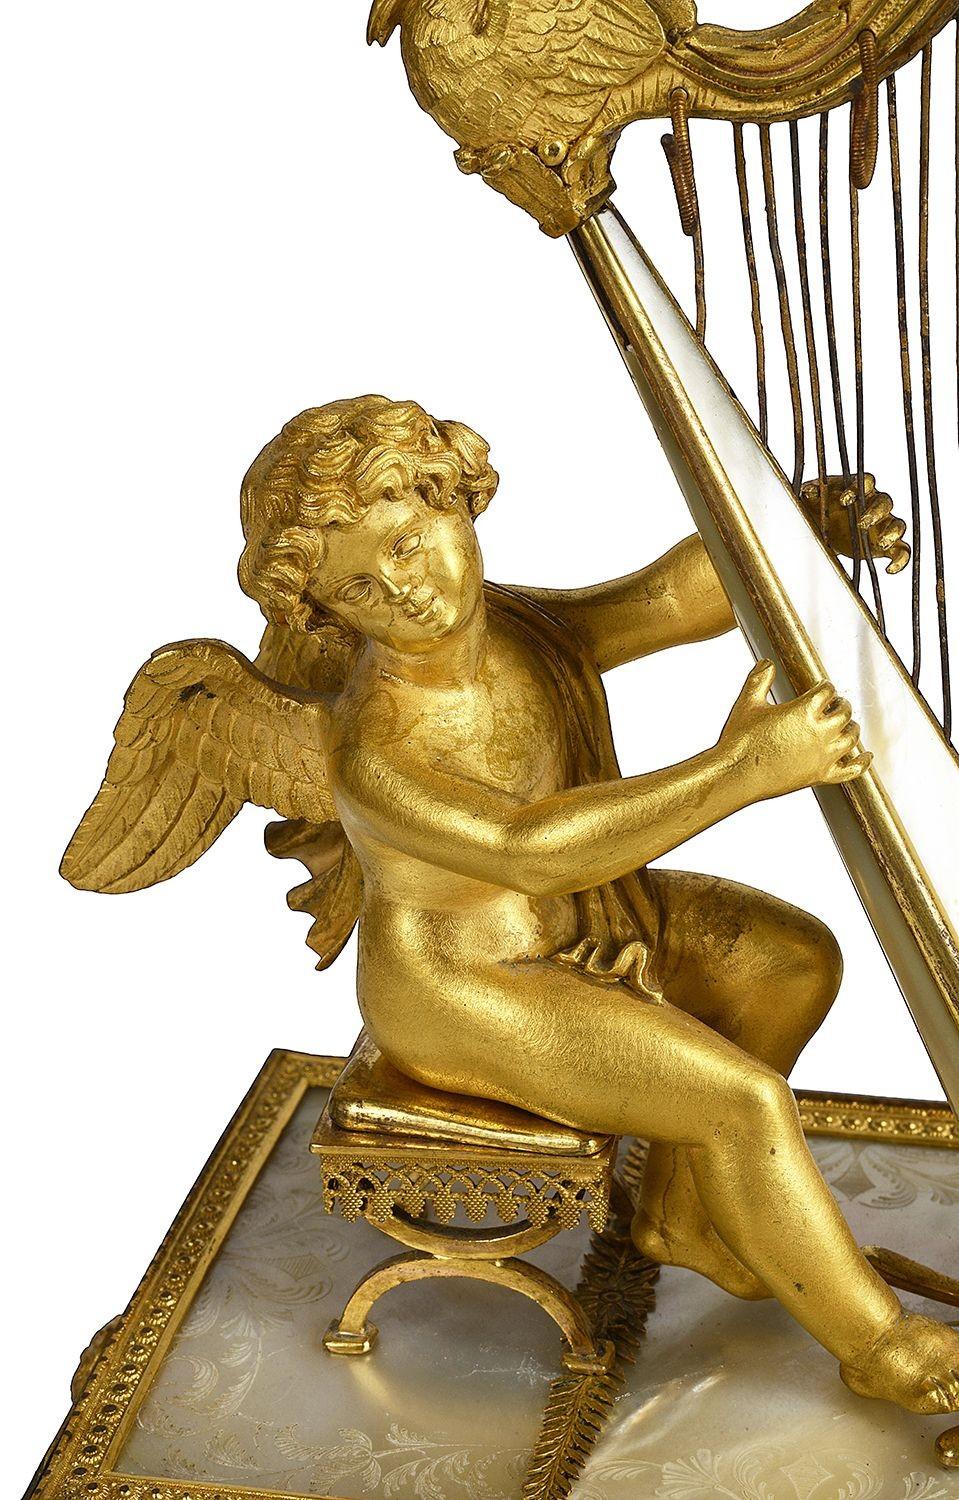 A rare and unusual Palais Royal gilded ormolu and Mother of Pearl music box, in the form of a cherub playing a harp, a velvet lined drawer for jewelery, a cherub seated on a stool while playing the Harp, hooks hanging from the Harp to hold rings,